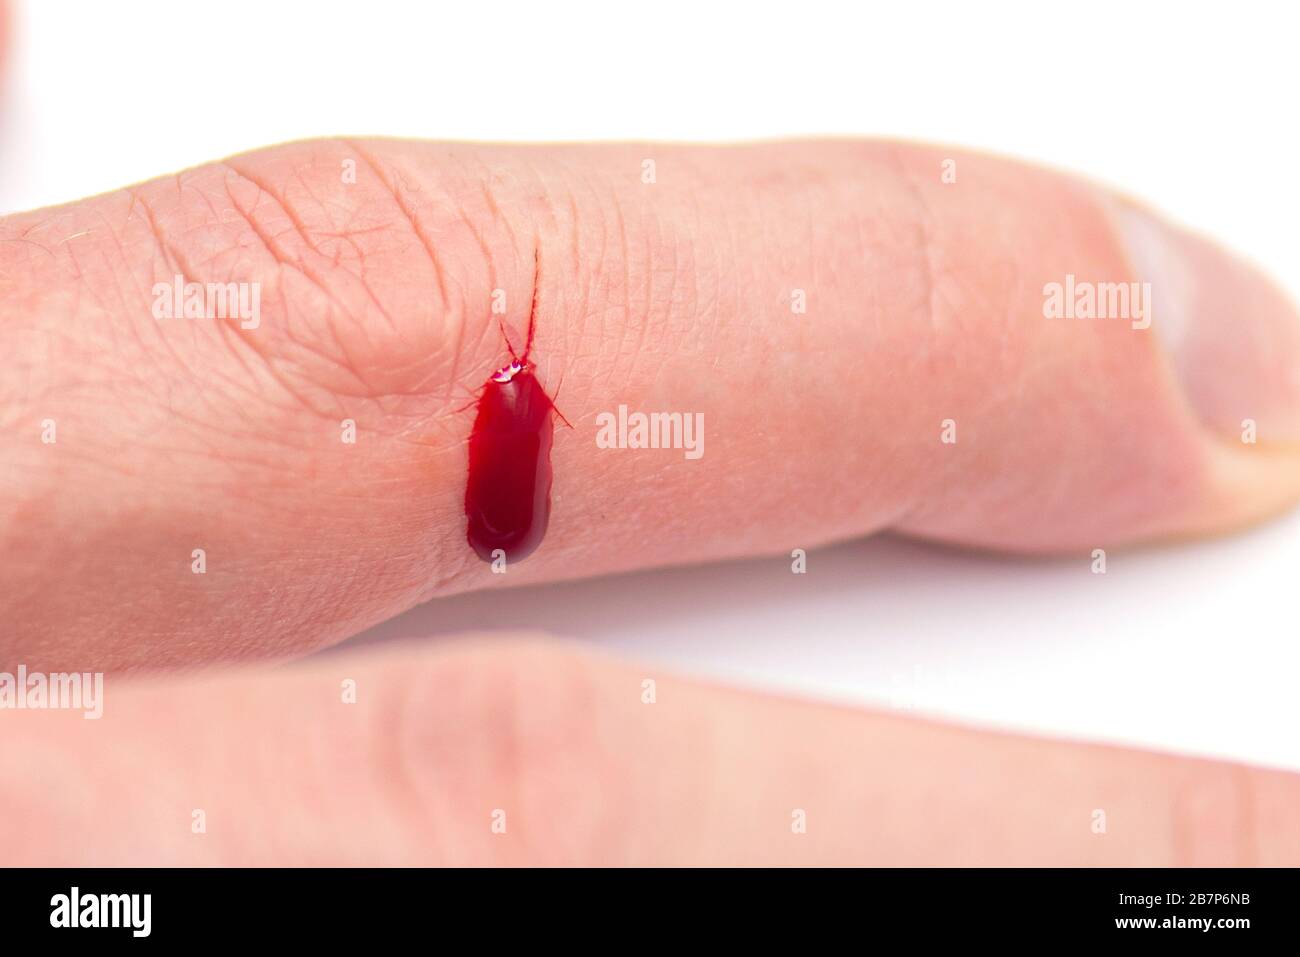 Close-up Finger with natural wound and drop of Blood, Injured Finger Stock Photo